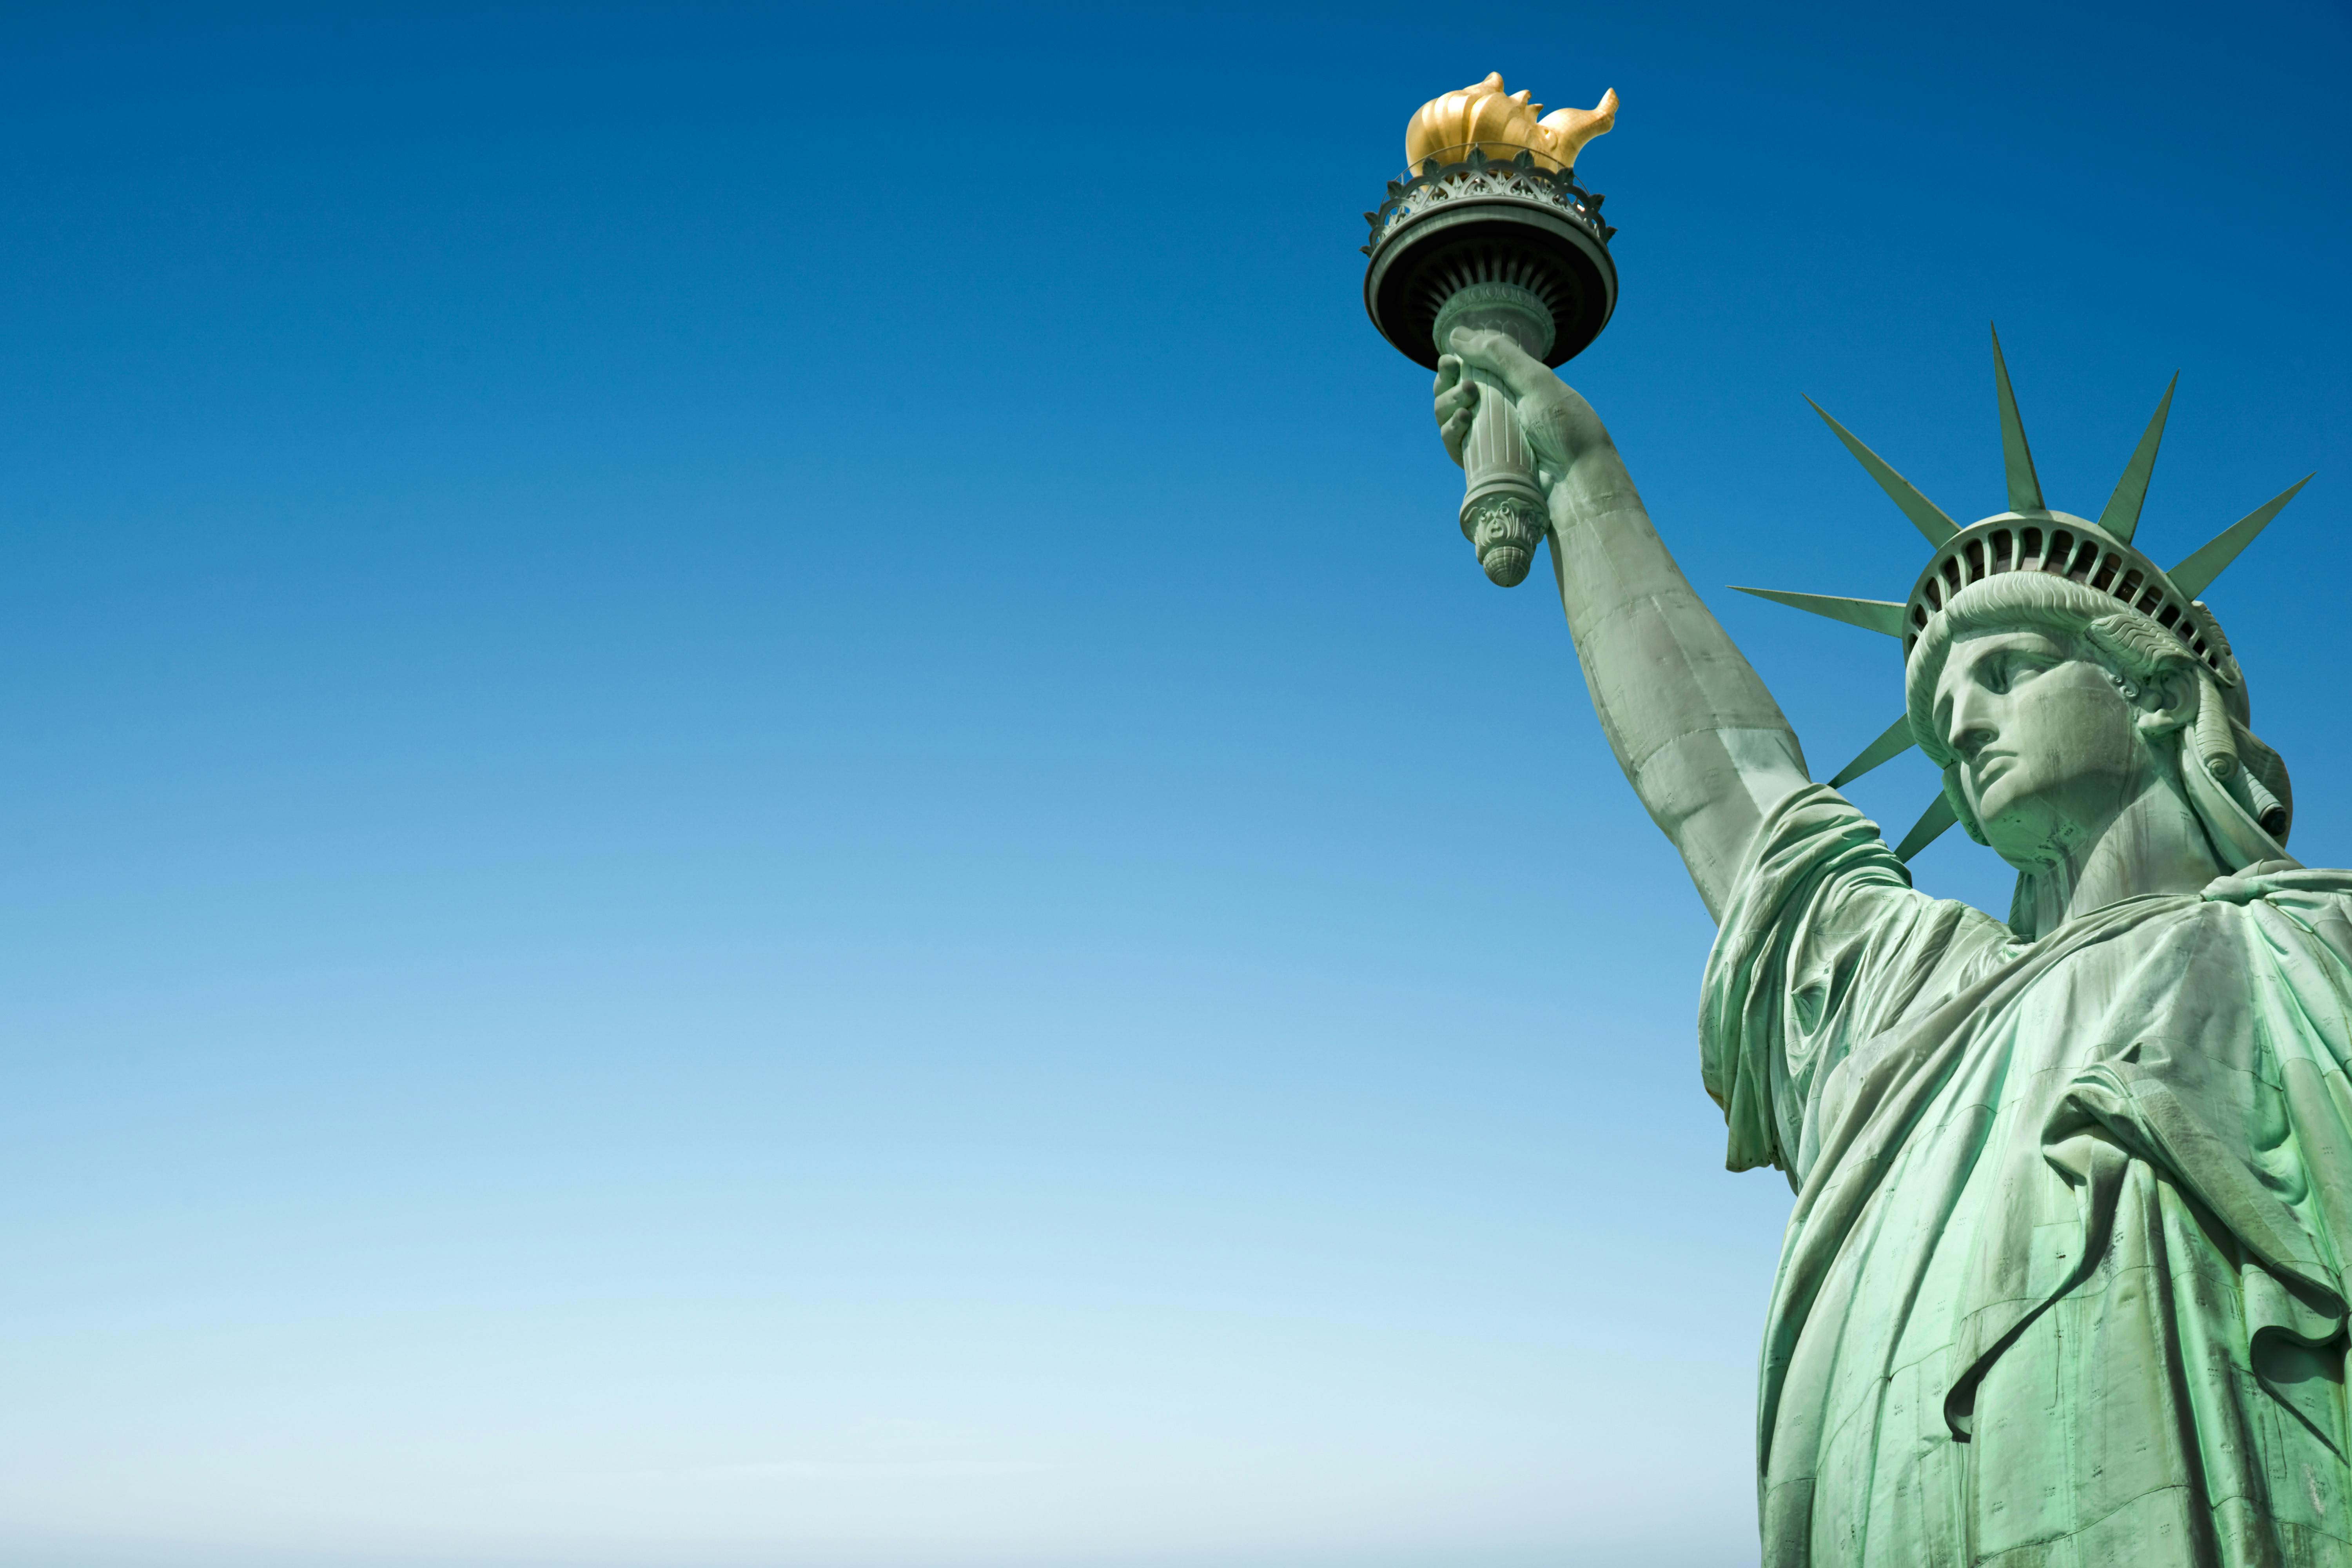 Skip the Line: 9-11 Memorial and Museum with Statue of Liberty cruise